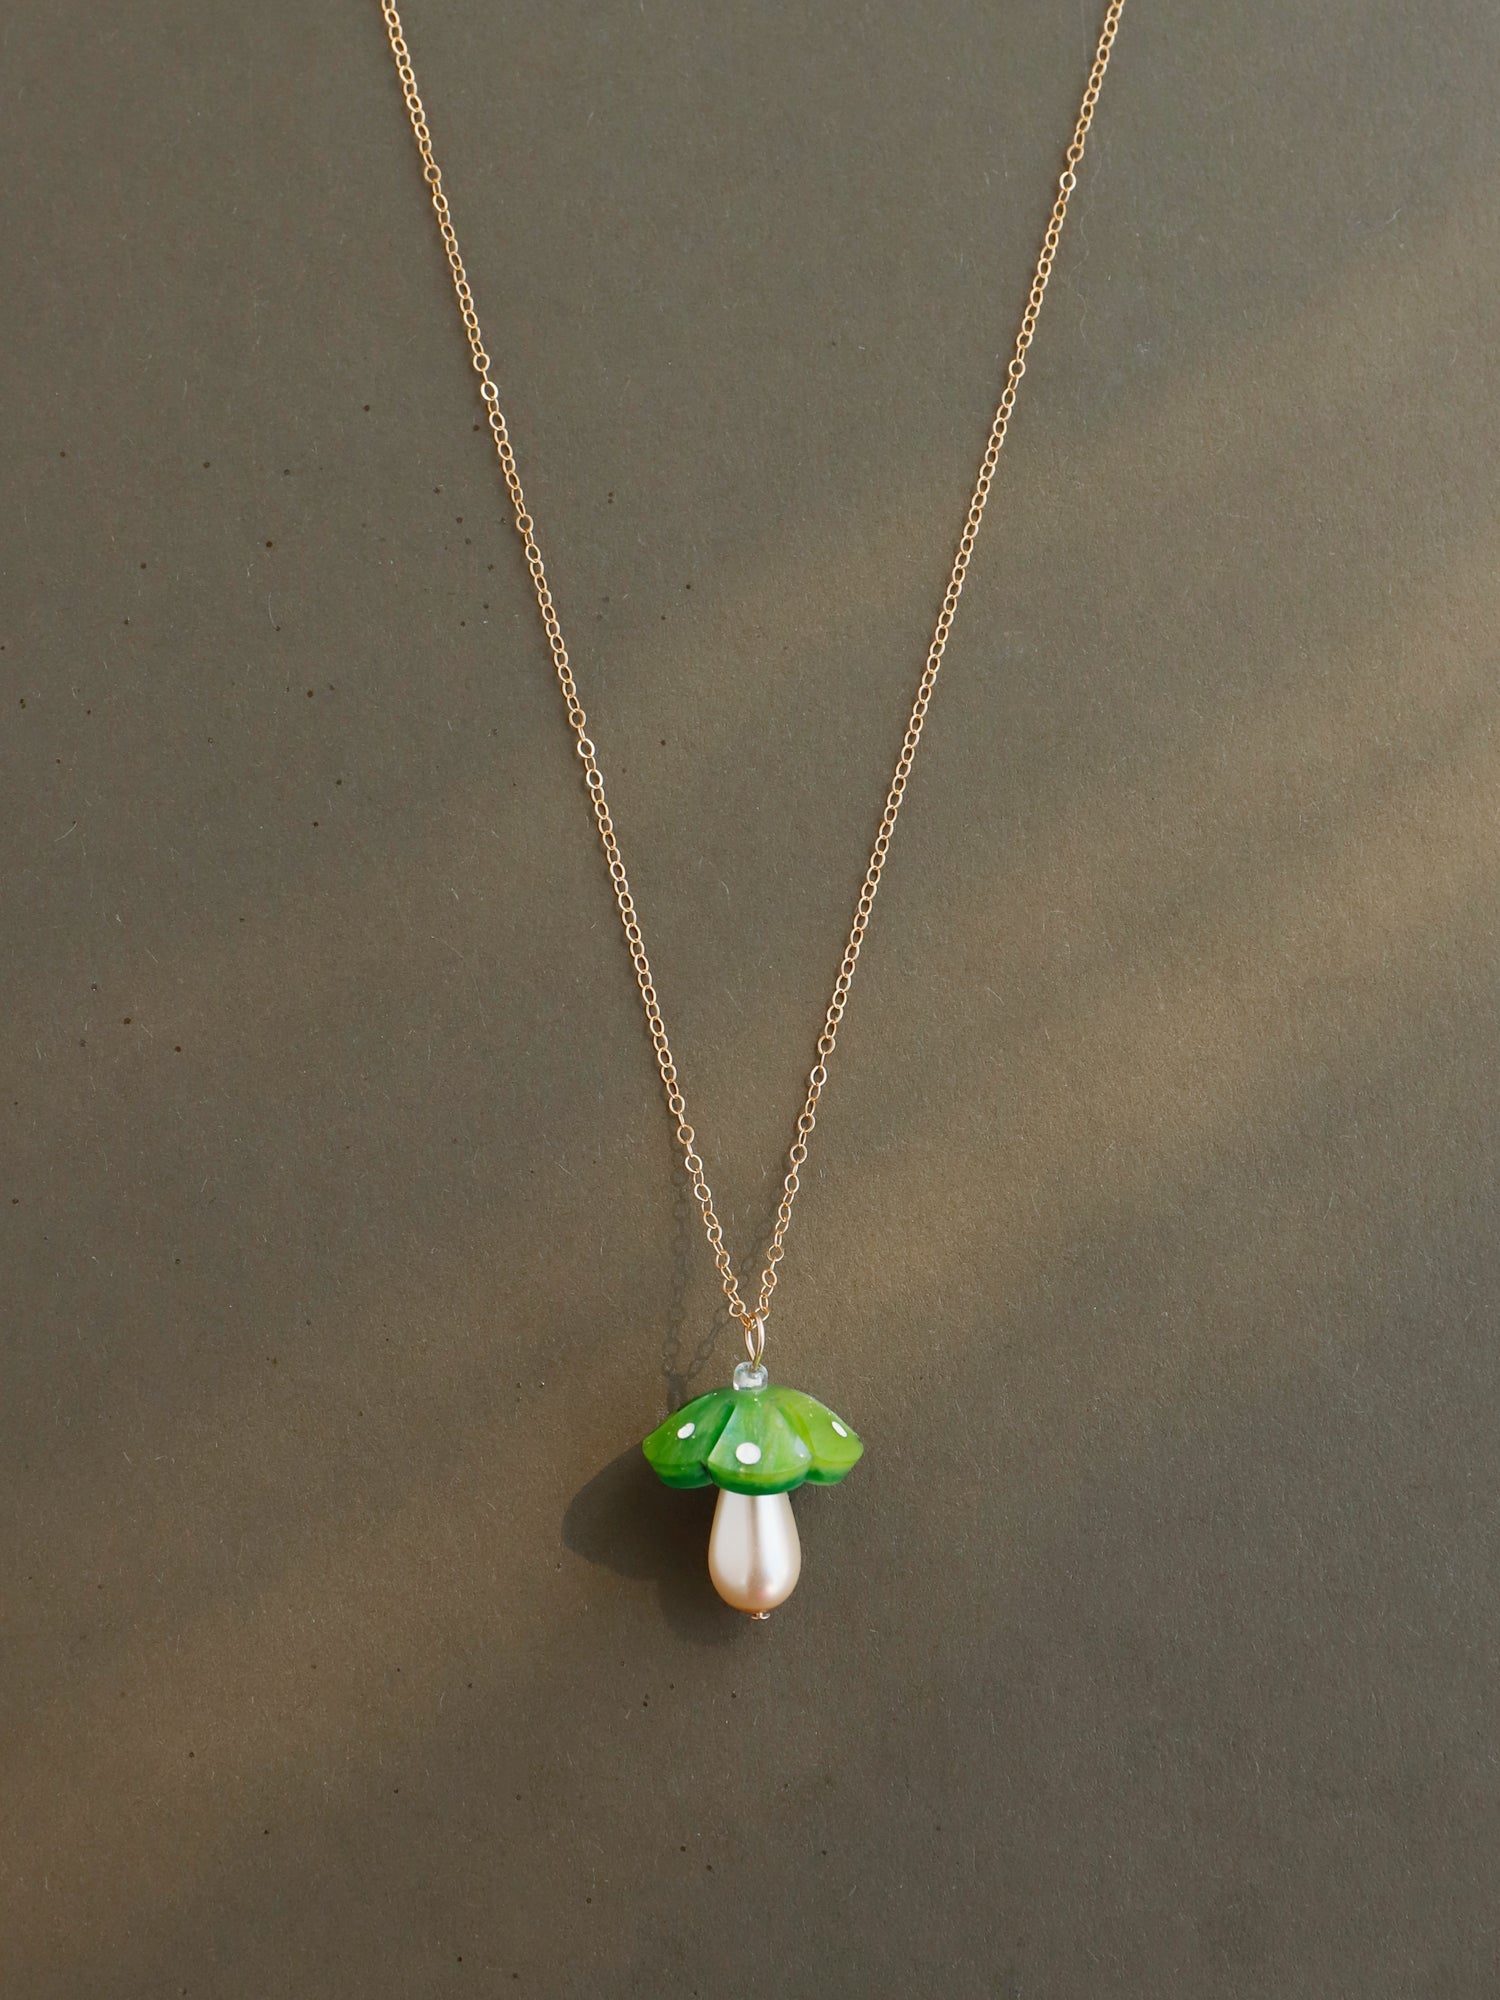 Green mushroom pendant necklace. Made from heat-formed acrylic with hand-inked details and finished off with a high quality Czech glass pearl. Pendant is hung on a high quality 50cm 14k gold-filled chain. Handmade in the UK by Wolf & Moon.